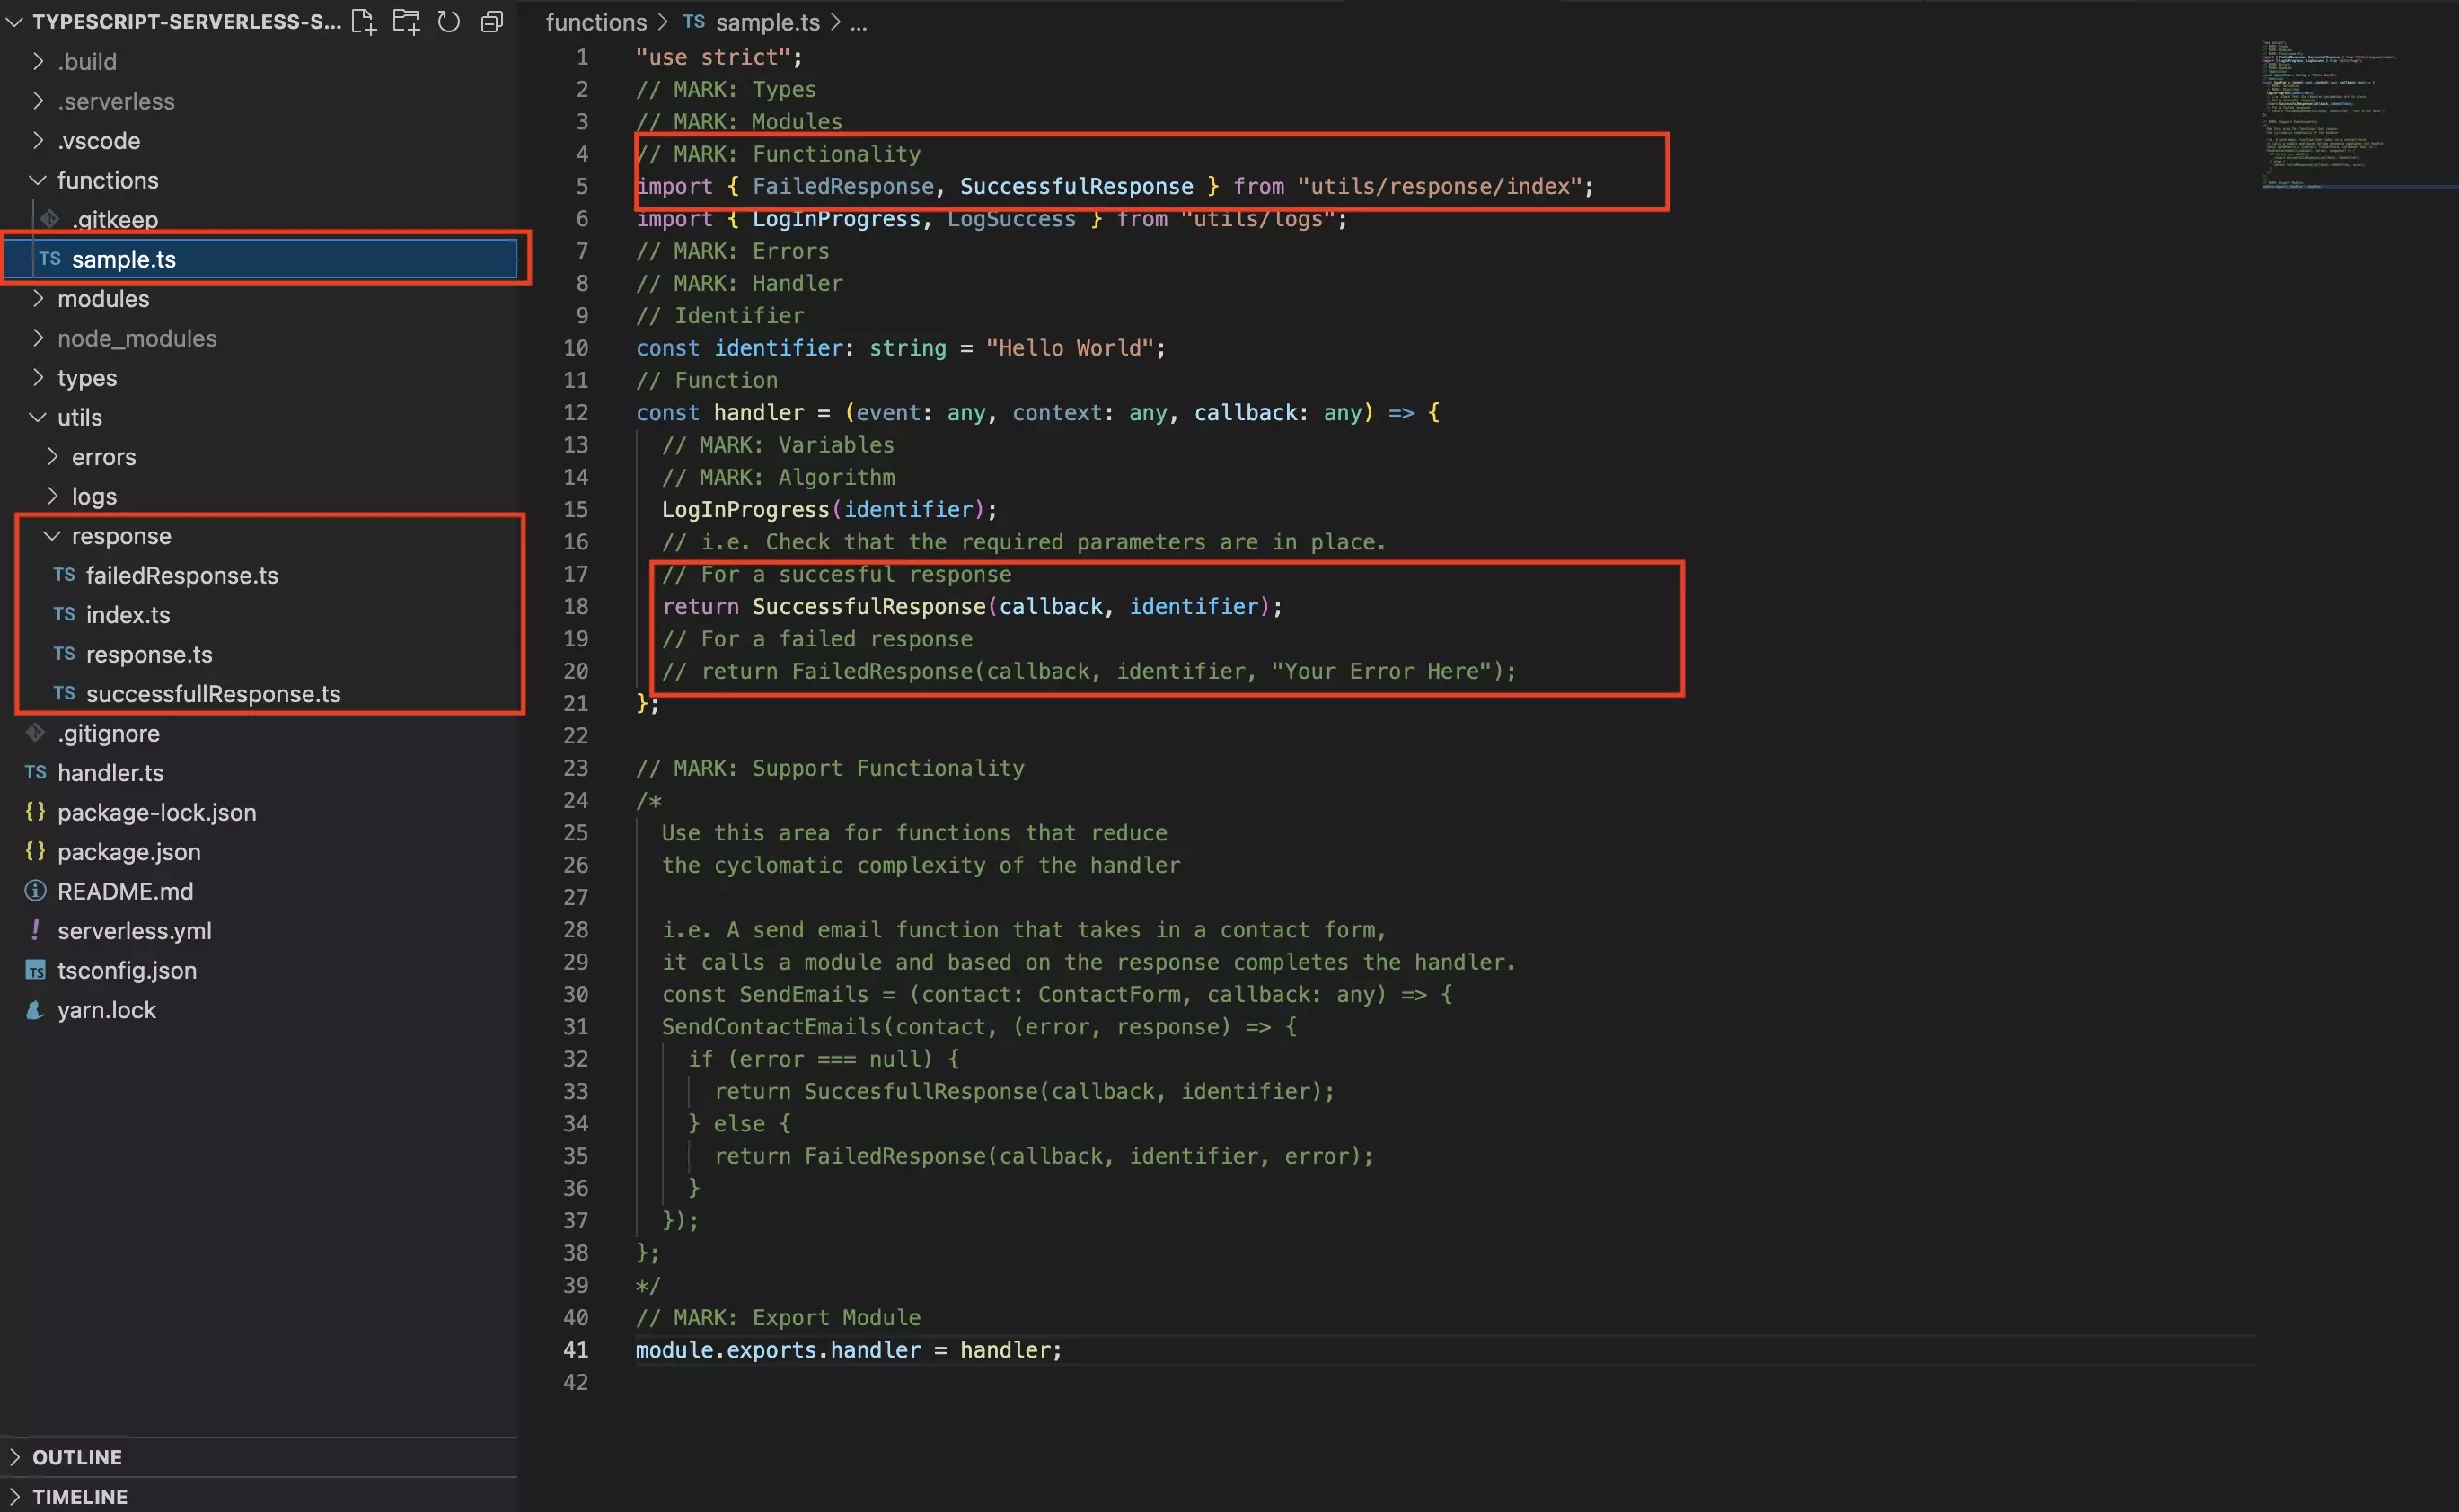 A screenshot of VSCode with highlights over the folders for the responses and functions; as well as highlights over the code that's available in sample.ts, which offers the imports to the responses and where the sample responses are found.